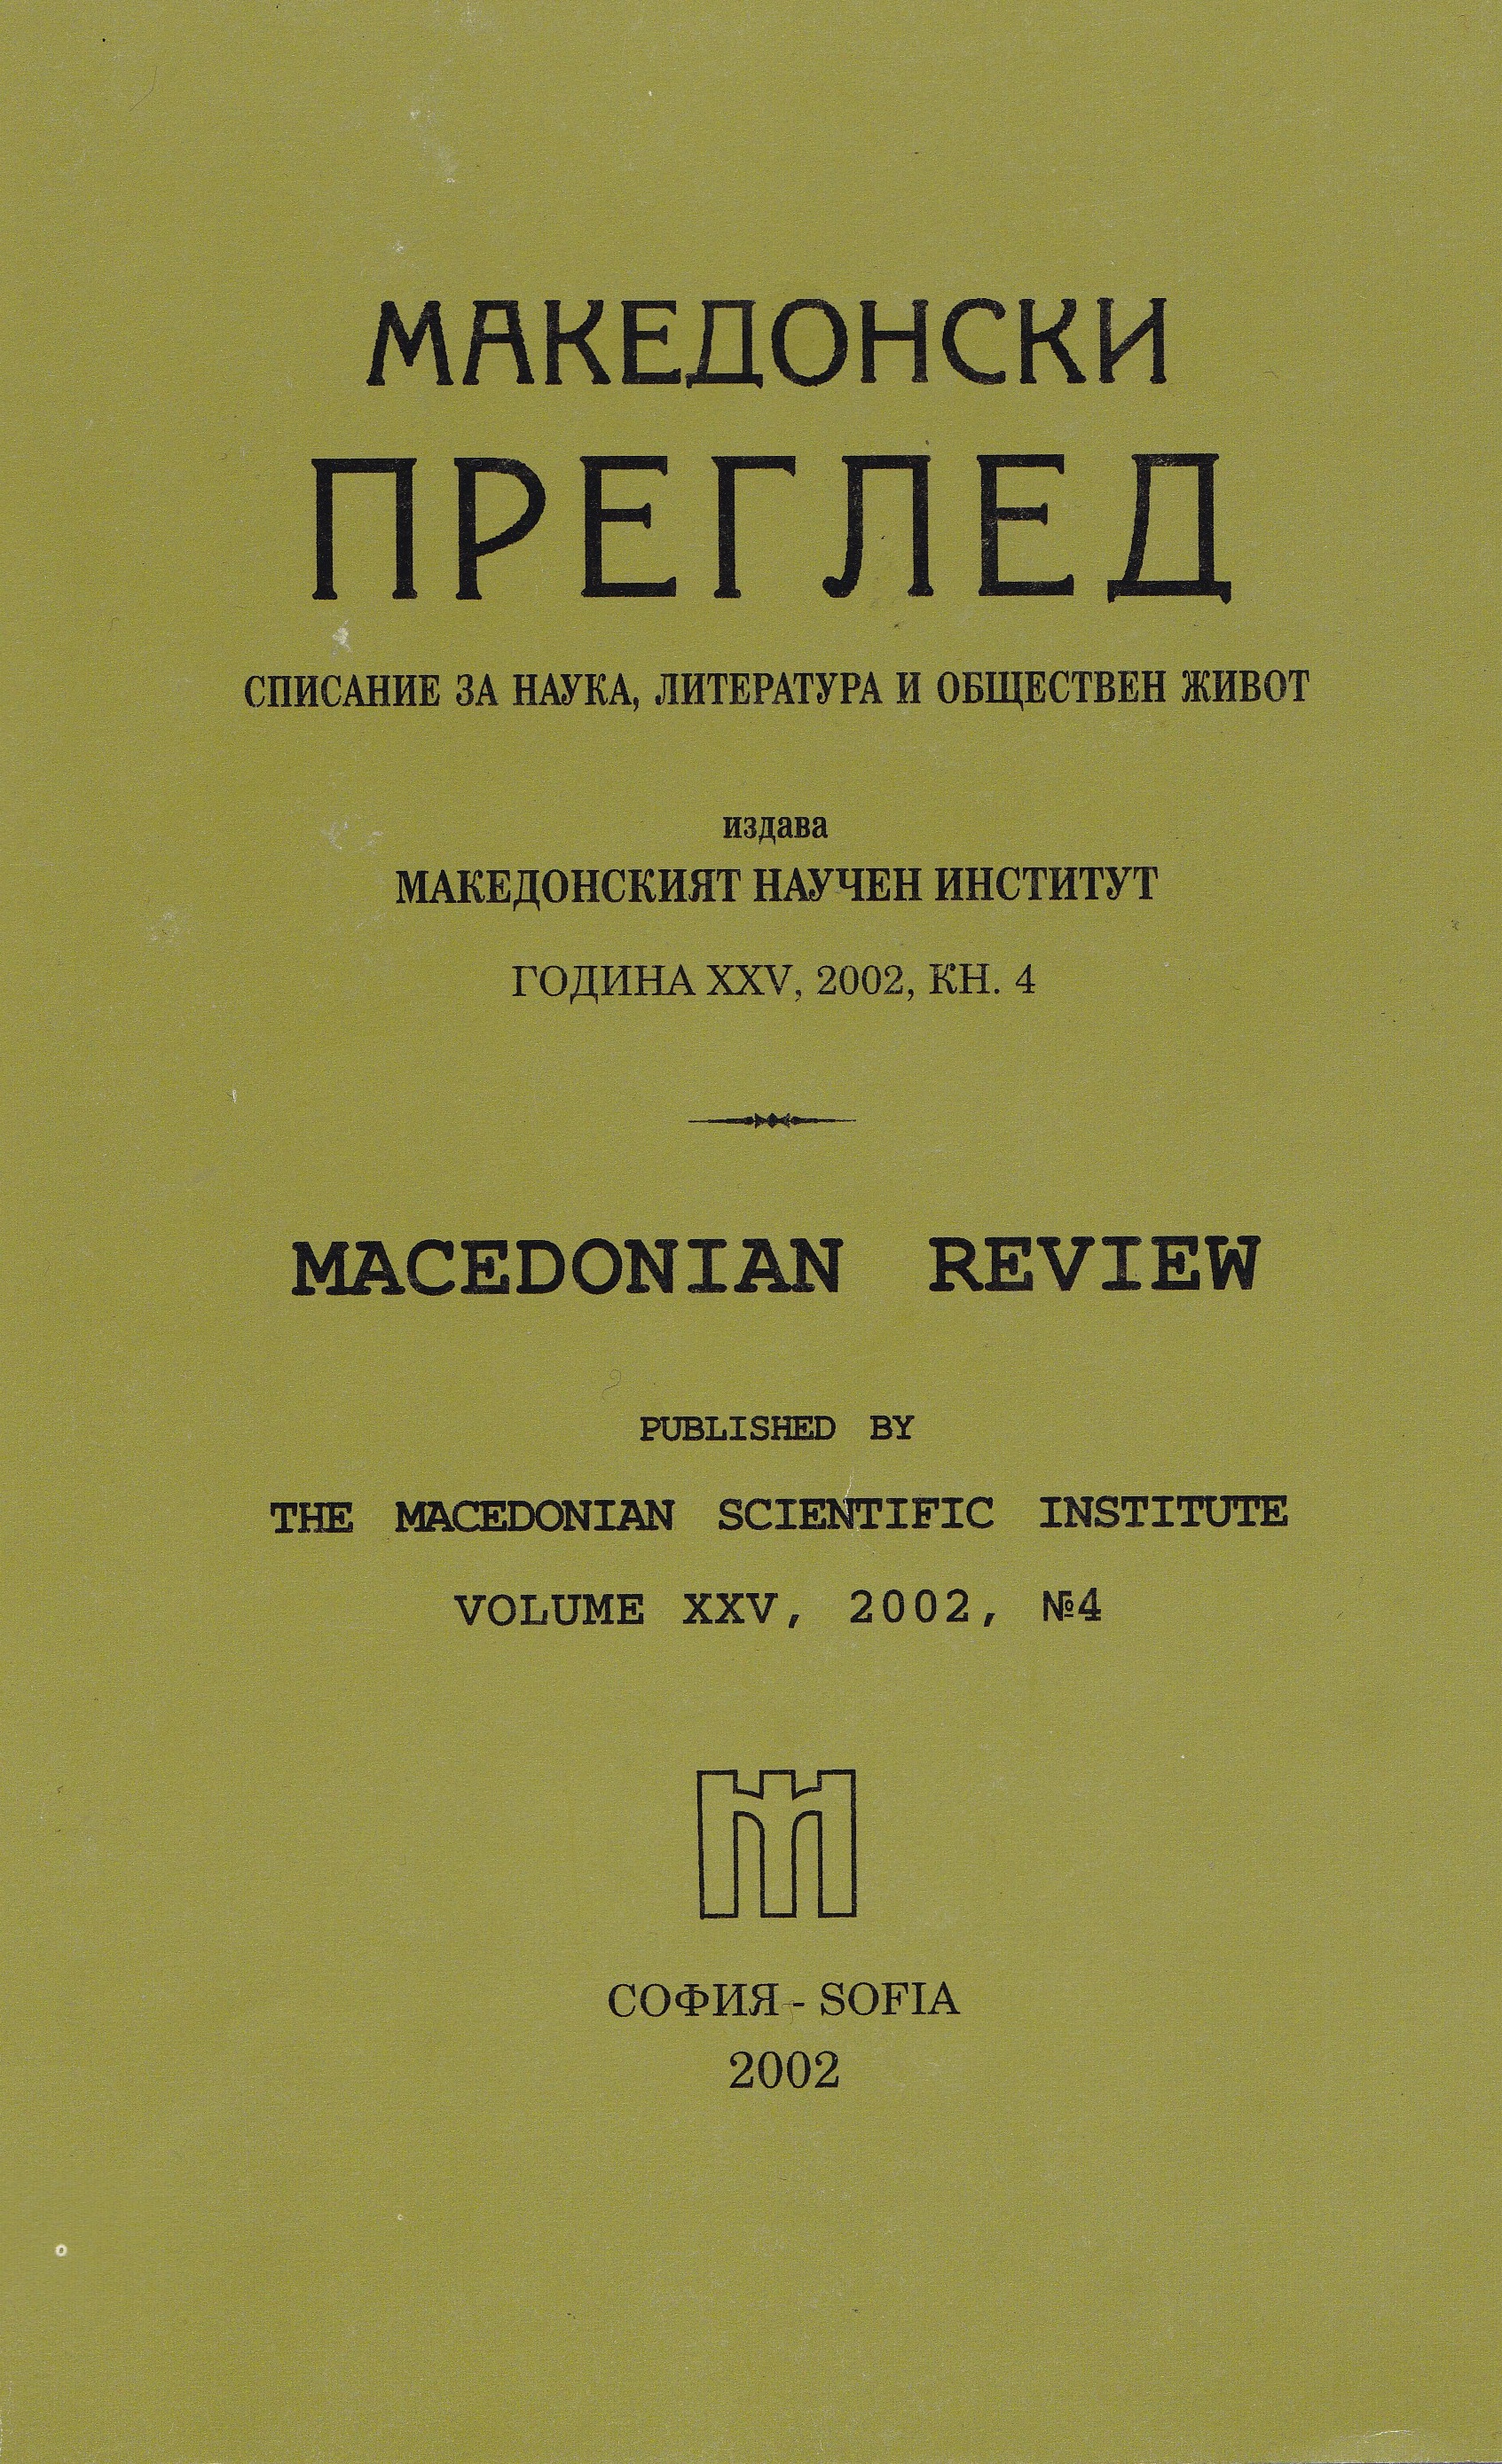 Bulgaria in Polish Literature and Journalism 
in the 19th and Early 20th Century Cover Image